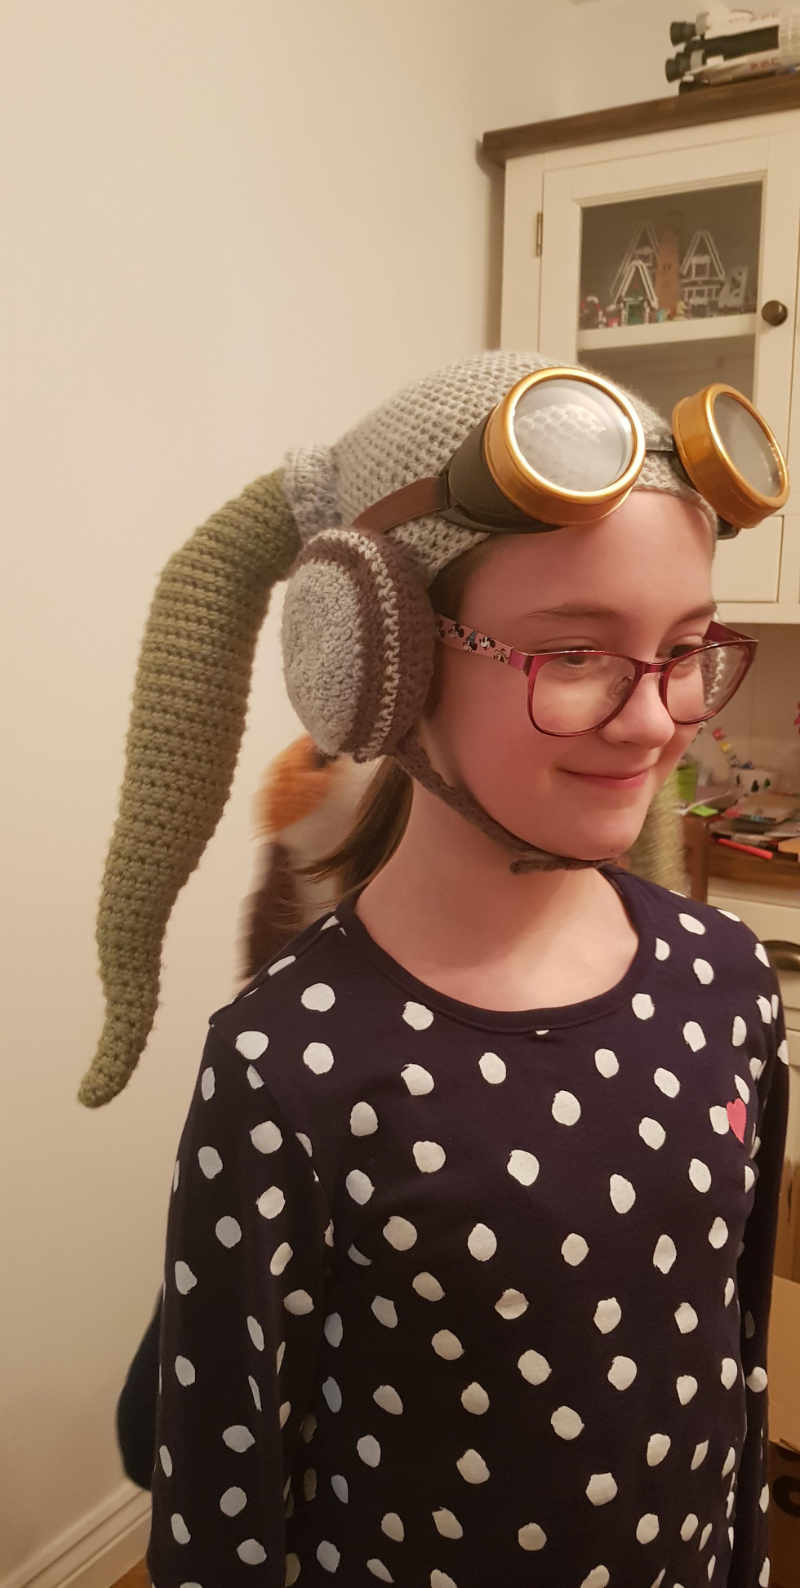 My wife made my daughter a Hera Syndulla hat